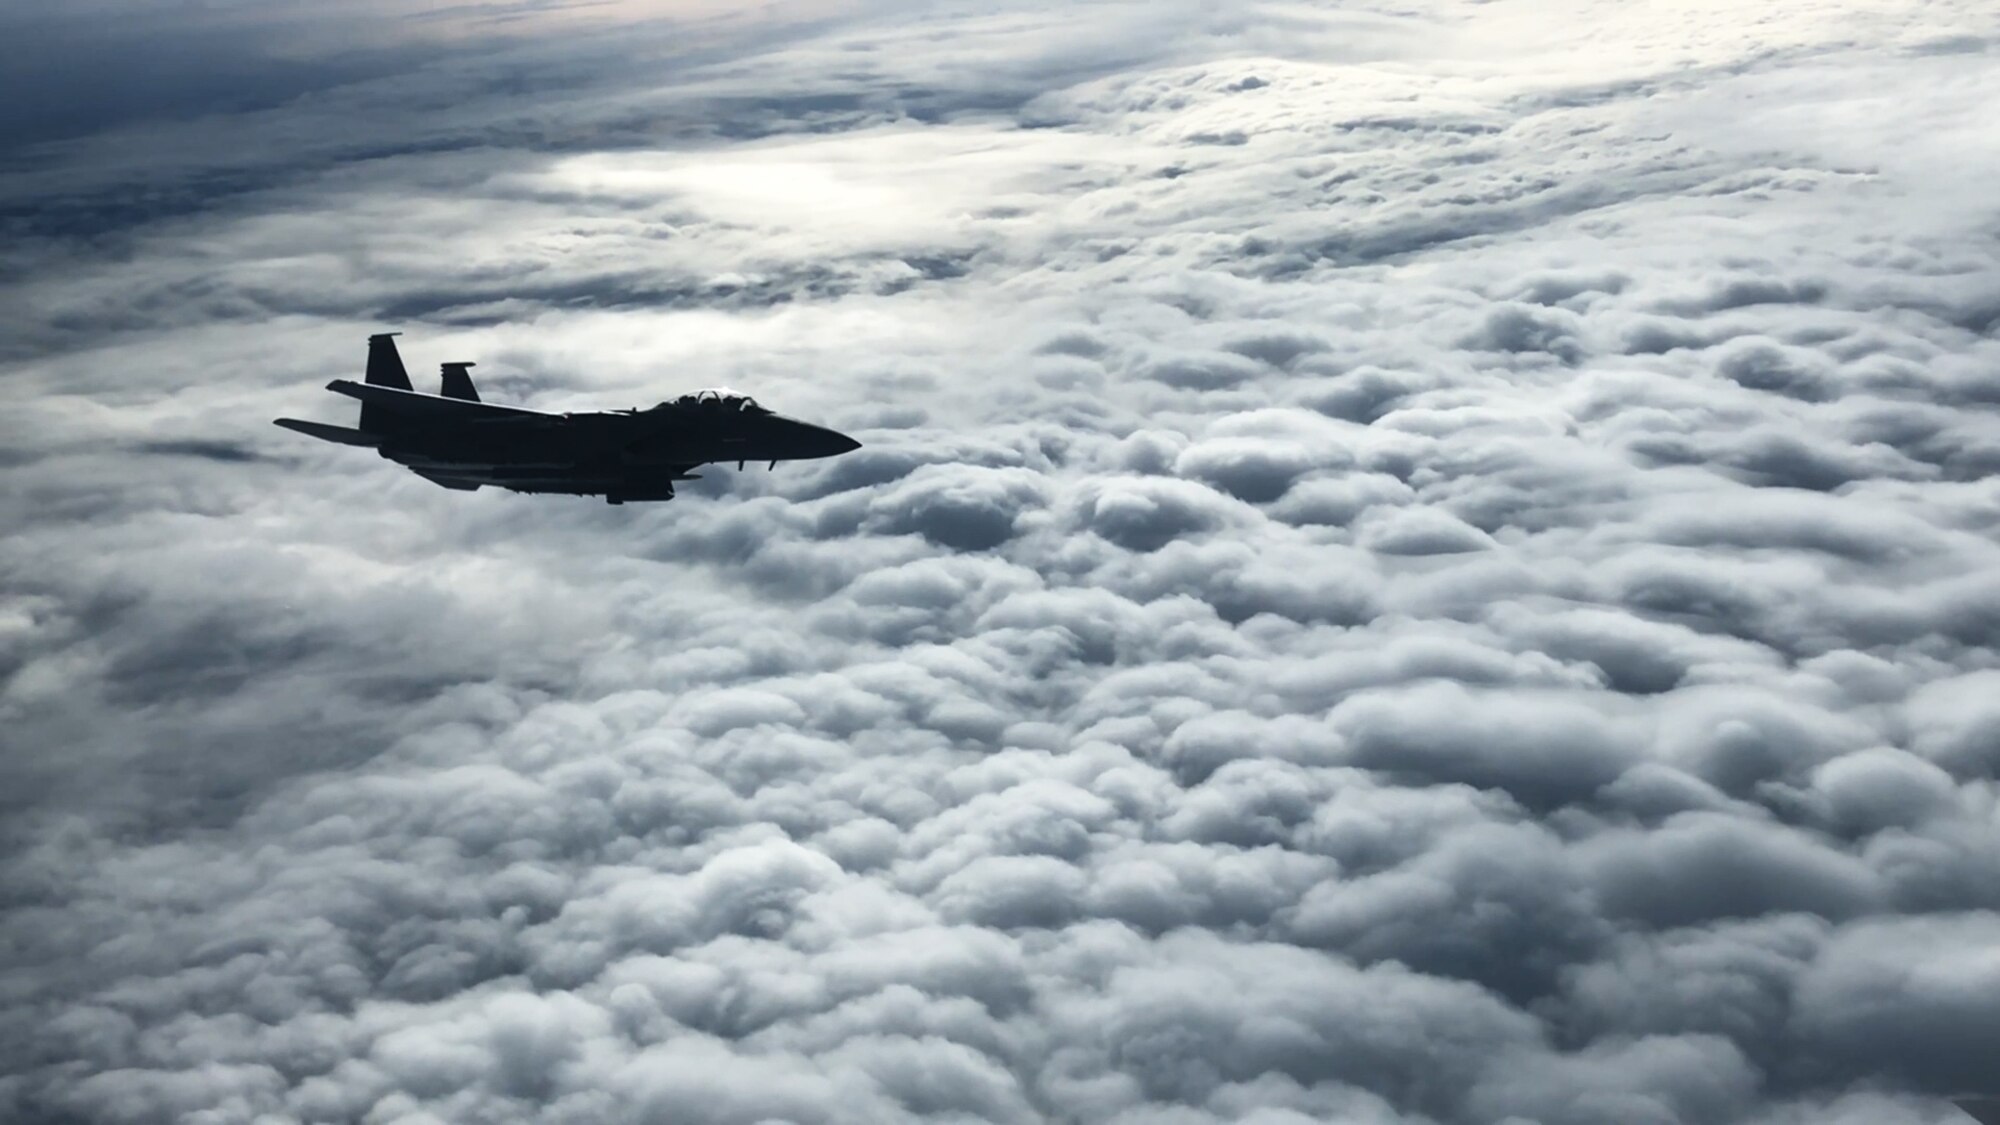 A U.S. Air Force F-15E Strike Eagle with the 48th Fighter Wing from RAF Lakenheath, England, flies beside a U.S. Air Force KC-135 Stratotanker with the 100th Air Refueling Wing from RAF Mildenhall, England, during a deployment to Ӓmari Air Base, Estonia, Nov. 1, 2018. Estonia is a key NATO ally in Europe and a strong U.S. partner in fostering regional security and prosperity. (U.S. Air Force photo by Senior Airman Kelly O’Connor)